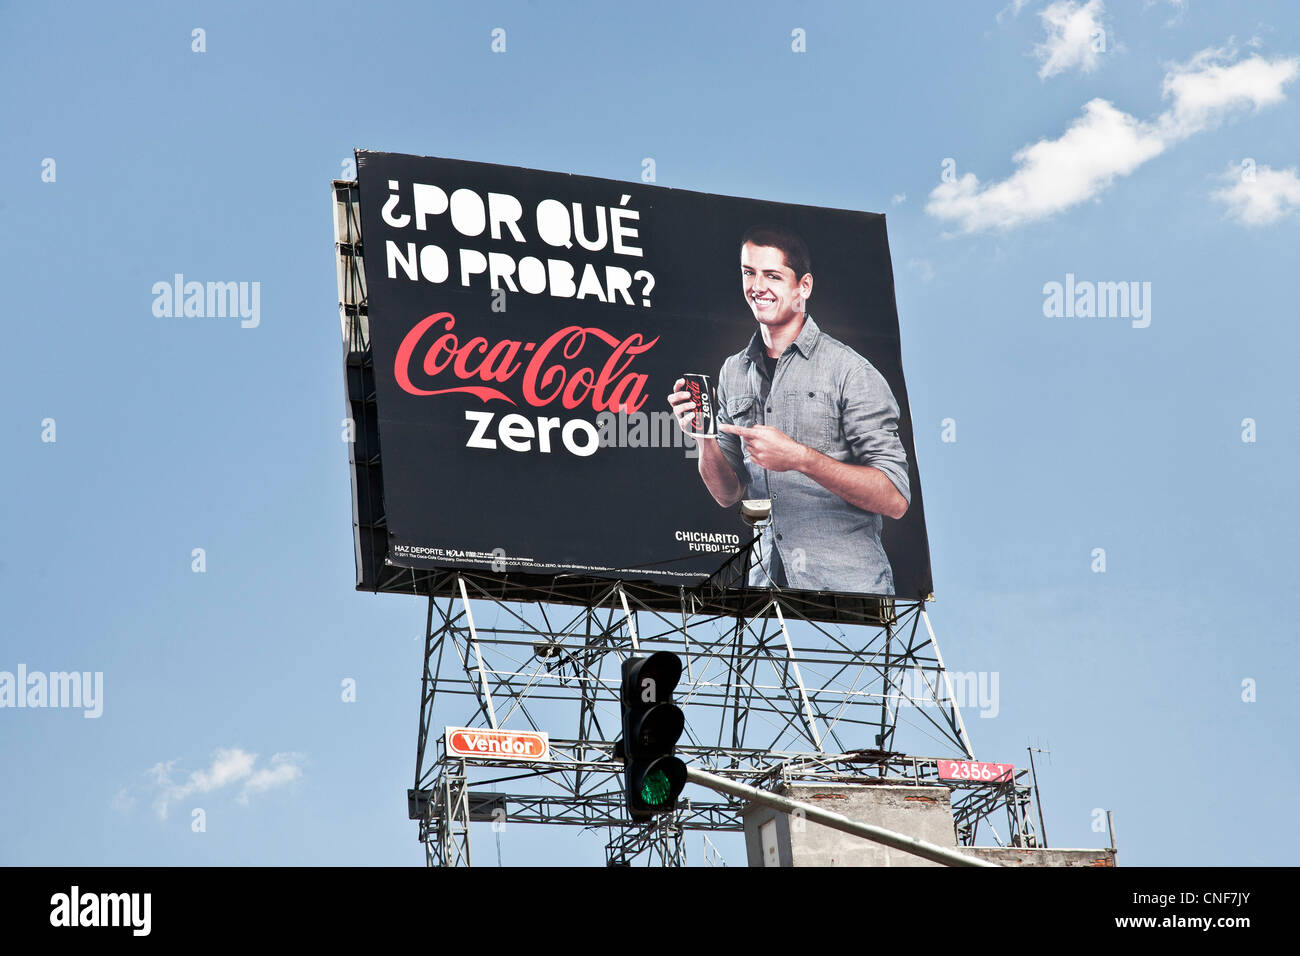 large billboard showing Mexican soccer star Javier Chicharito Hernandez endorsing Coca Cola Zero above intersection Mexico City Stock Photo